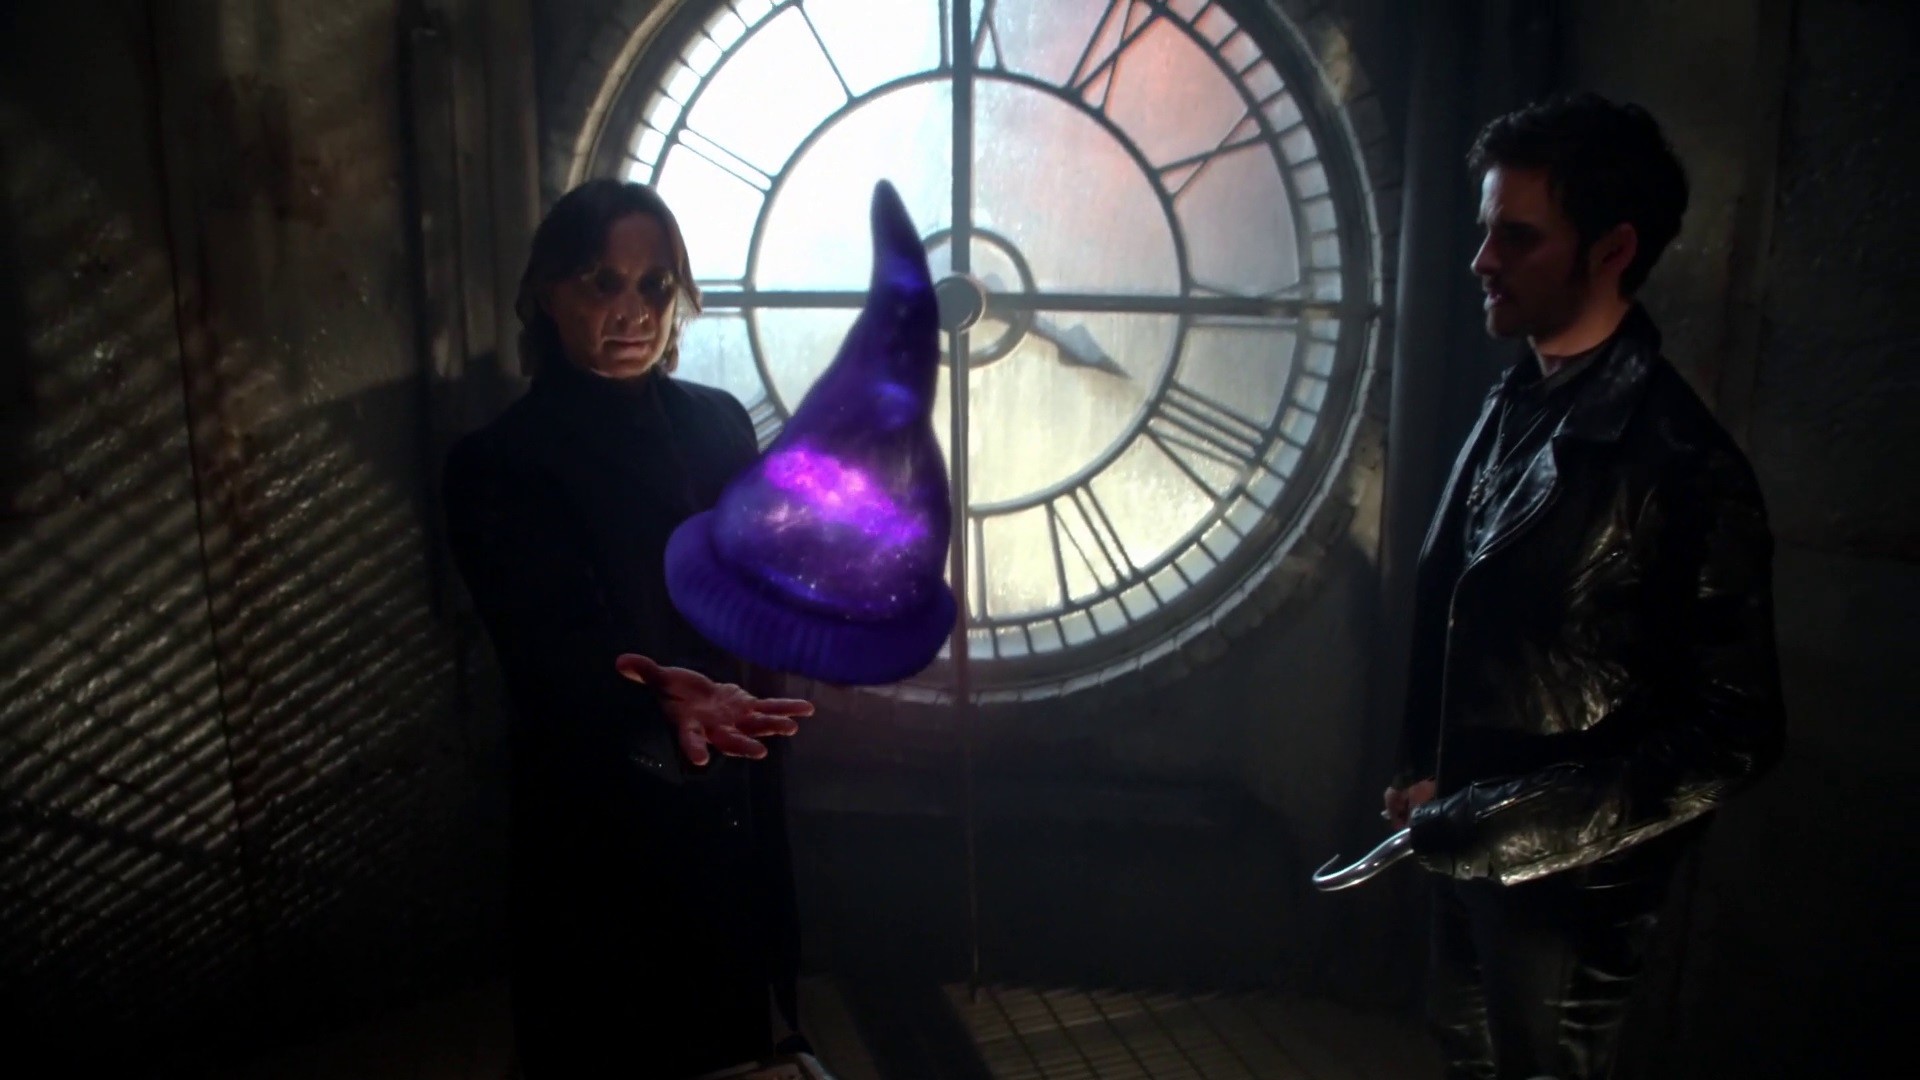 1920x1080 Once-Upon-a-Time-4x12-Heroes-and-Villains-Rumplestiltskin-holding-out-the- magic-hat.jpg